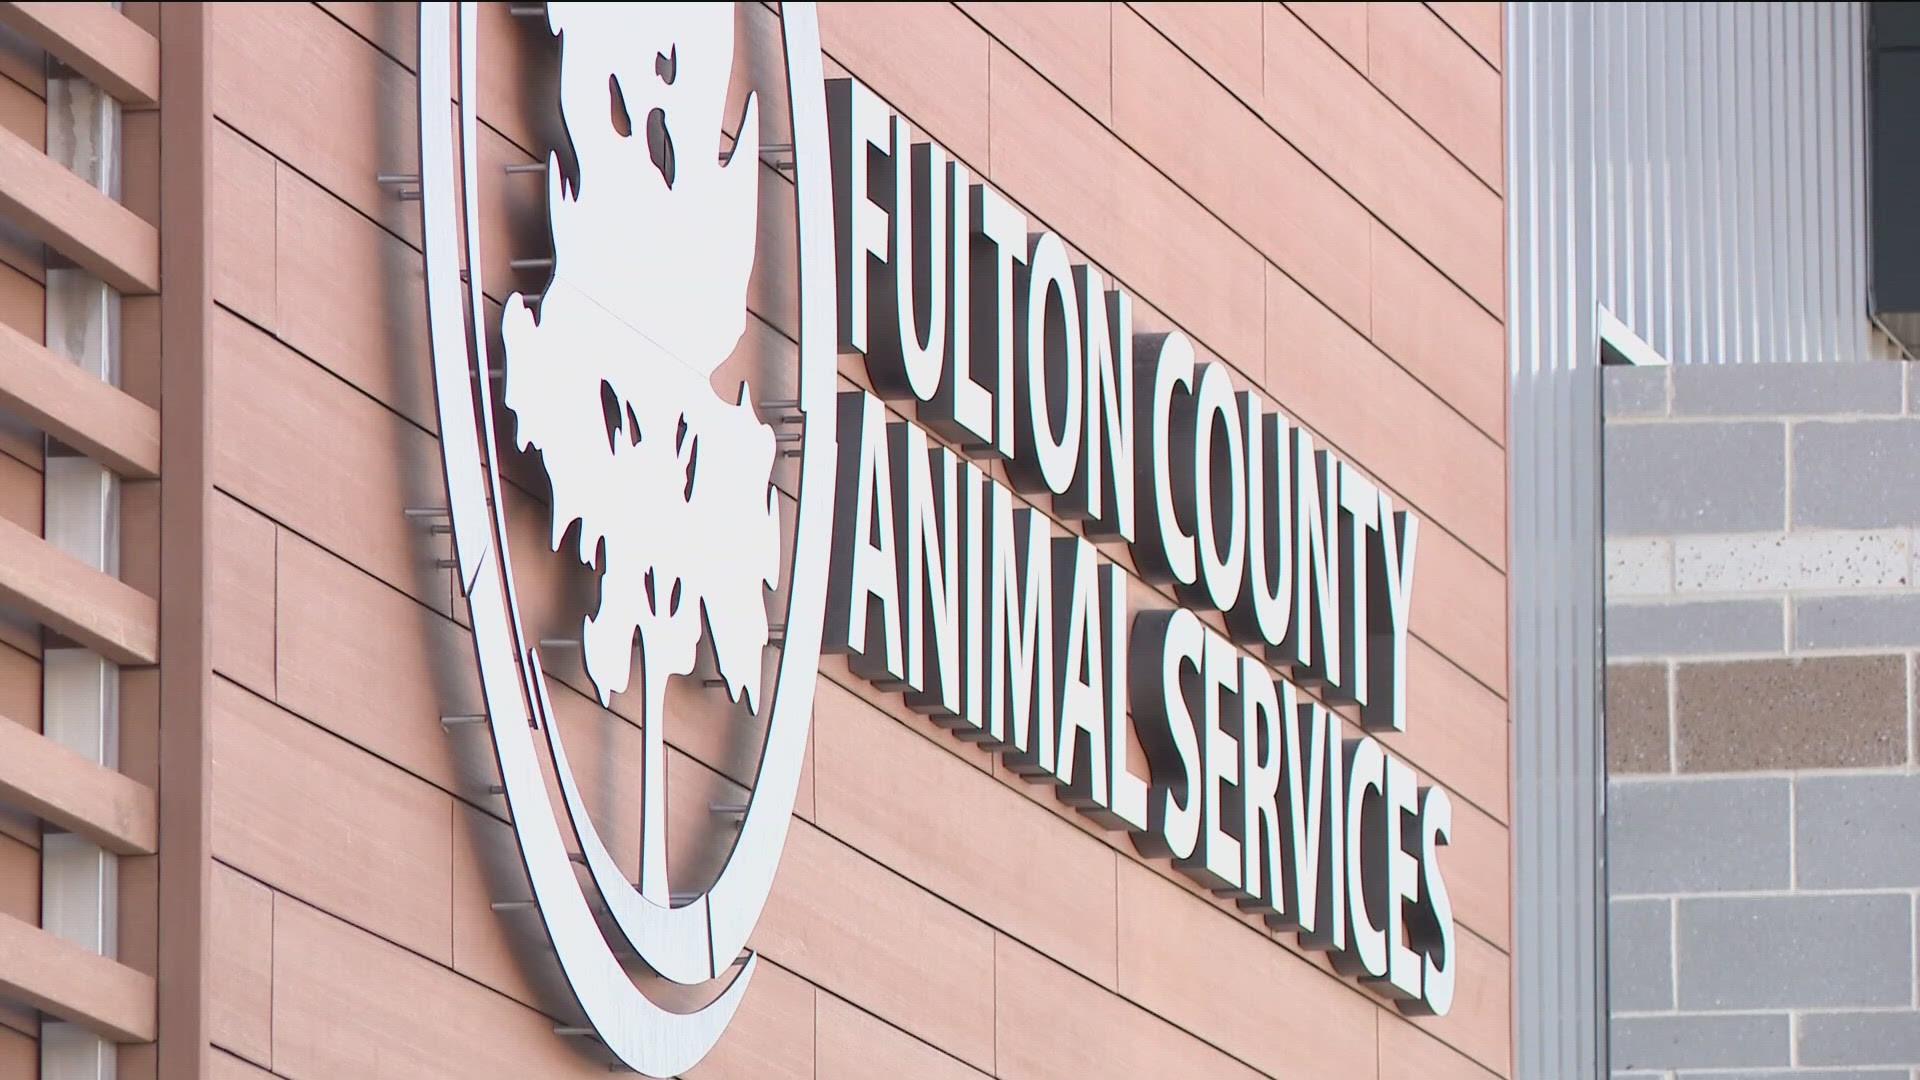 Earlier this month, Fulton County suspended animal services within city limits after the old agreement expired.